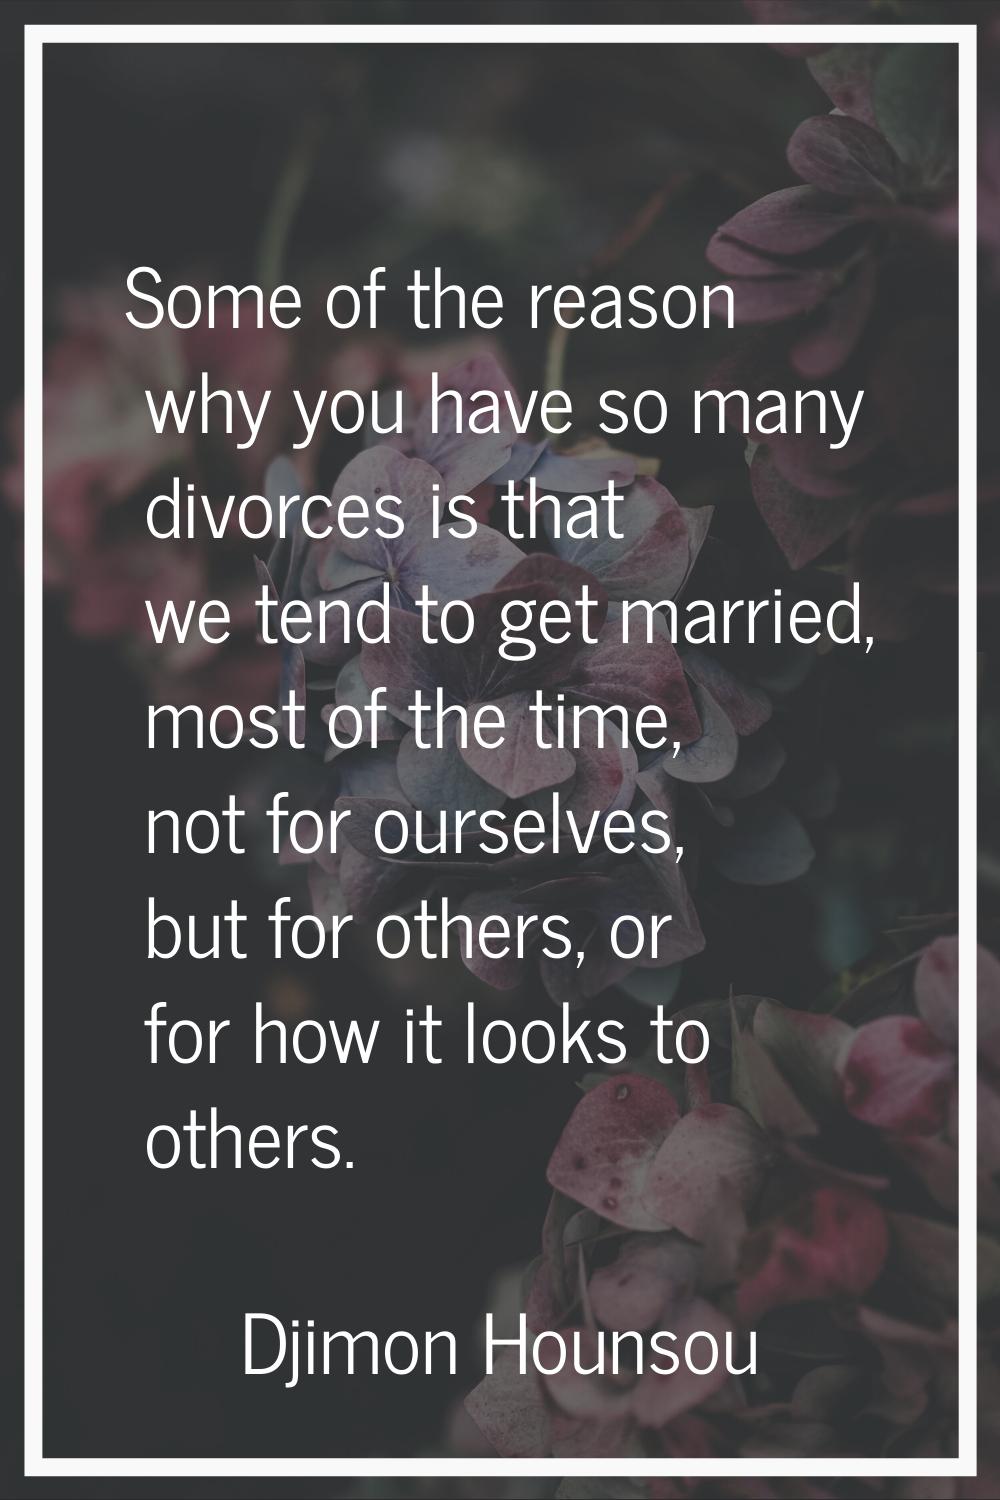 Some of the reason why you have so many divorces is that we tend to get married, most of the time, 